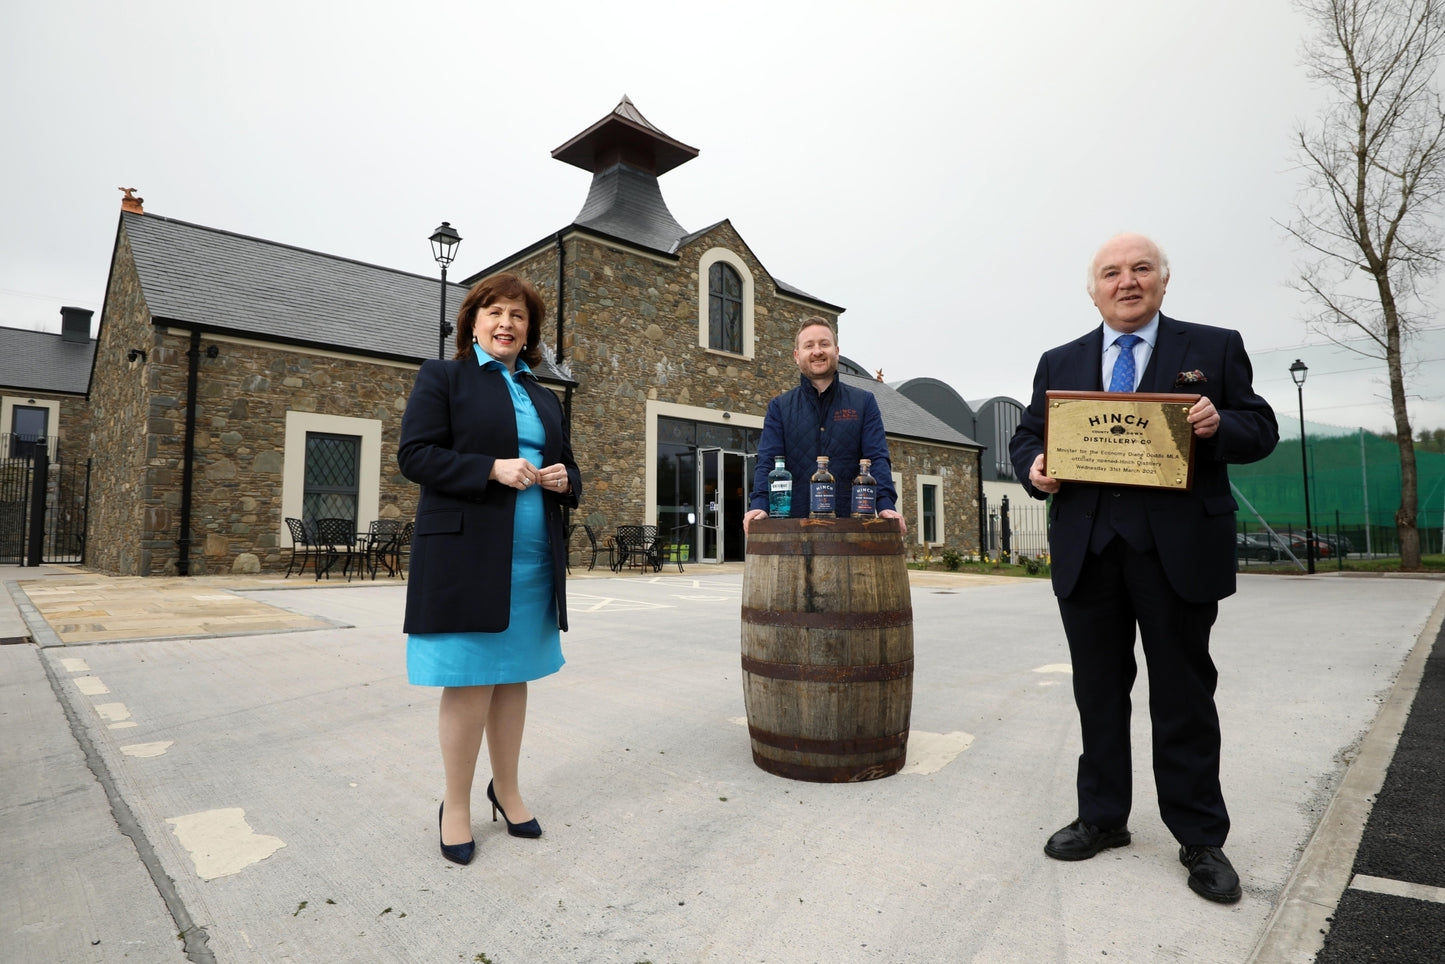 Economy Minister Cuts Ribbon on Hinch Distillery and Visitor Centre